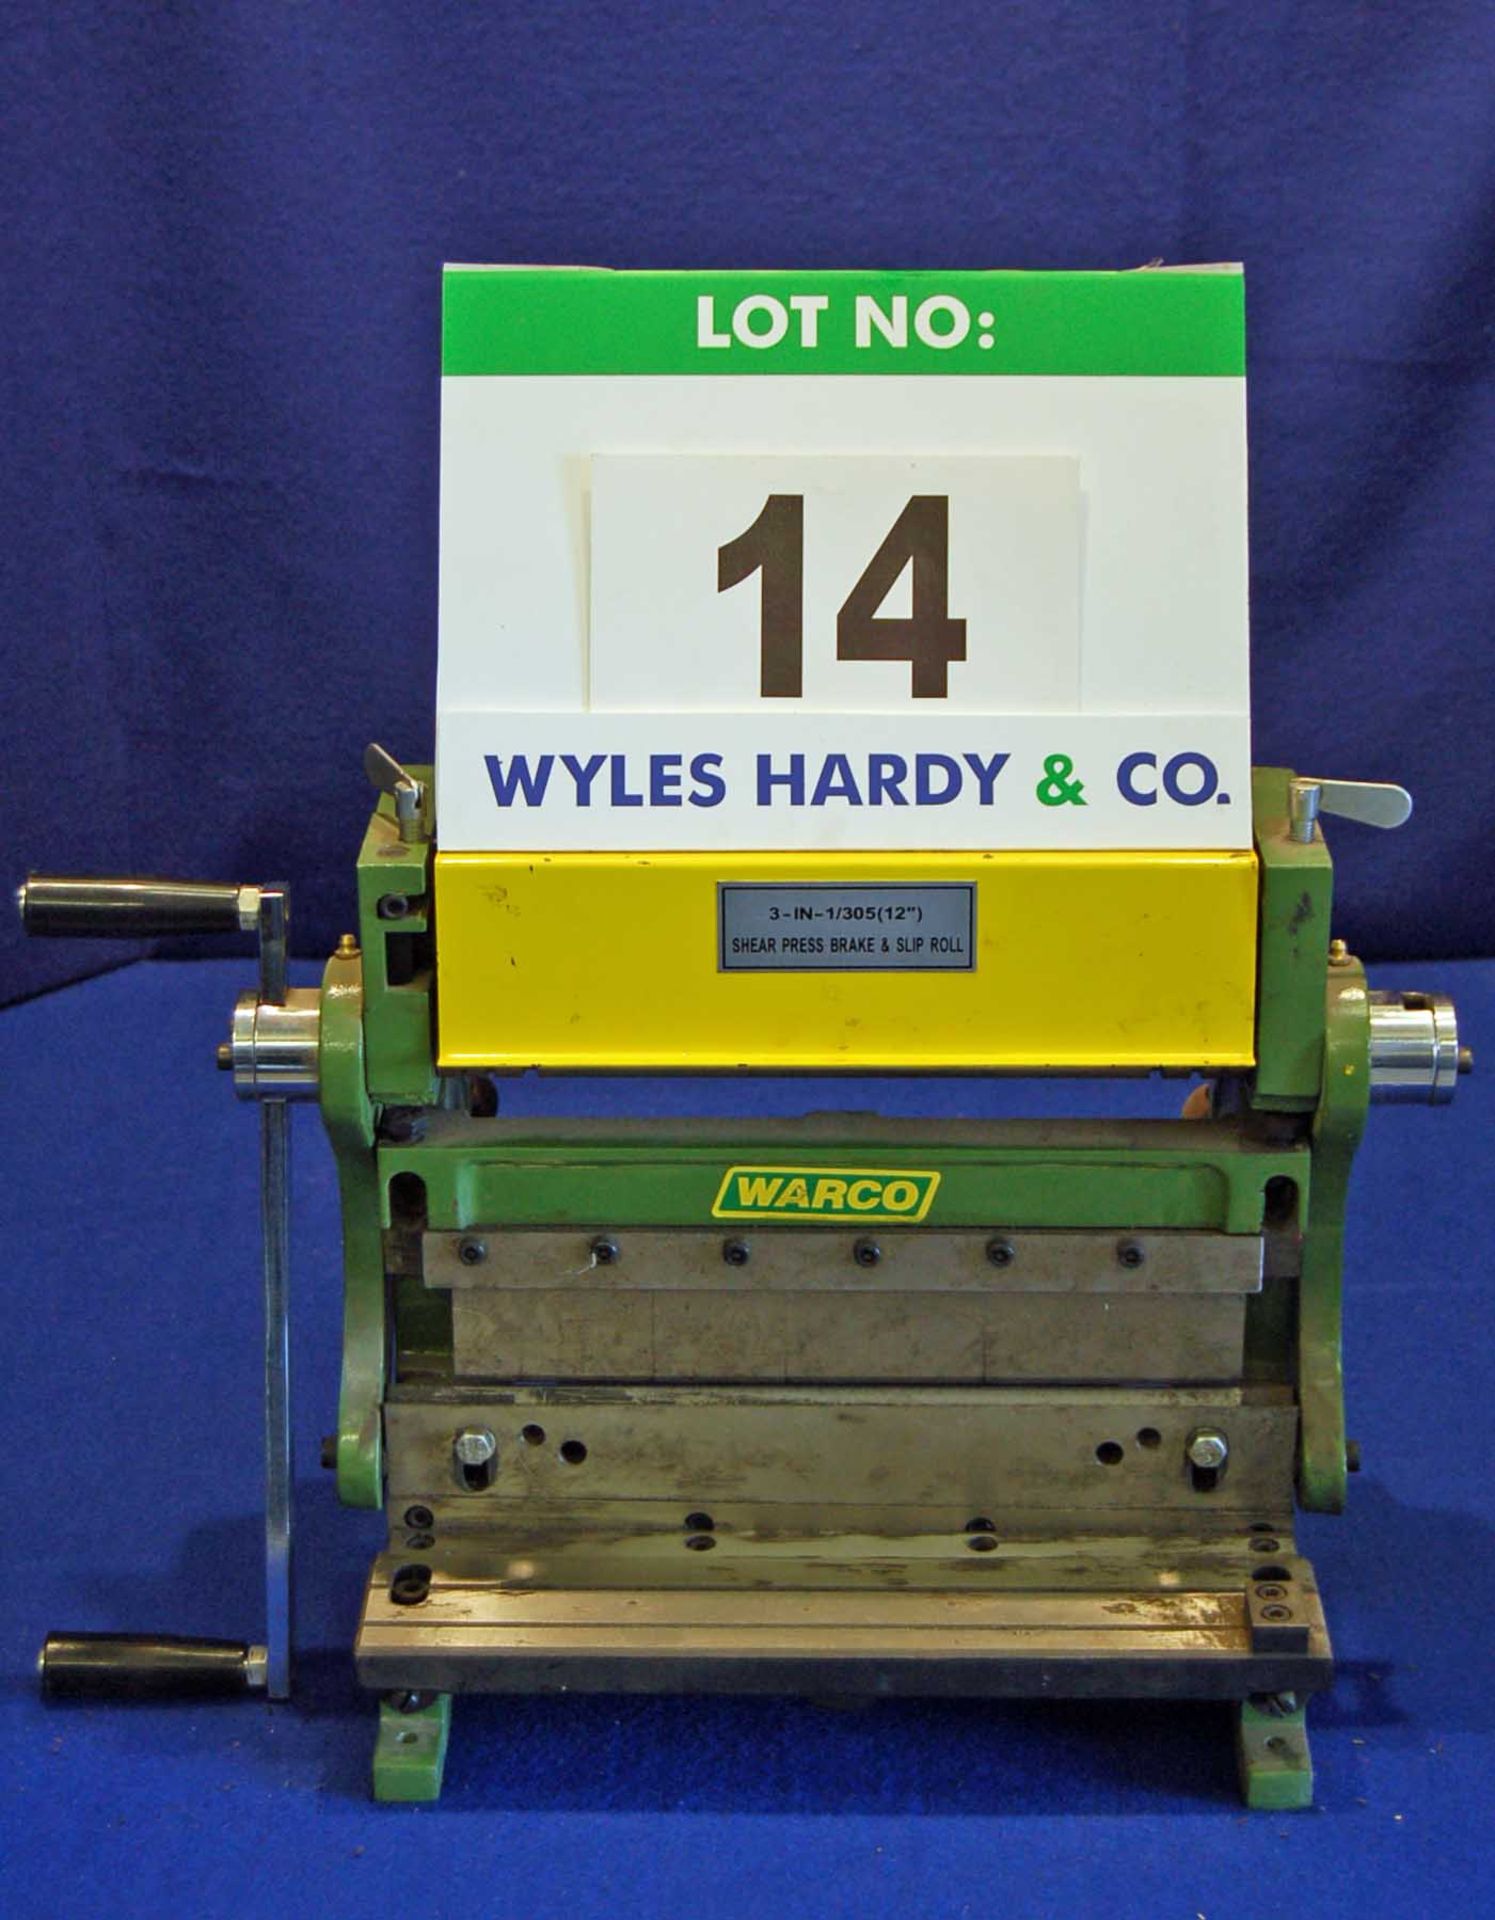 WARCO Bench mounted Folder/Guillotine/Initial Pinch Pyramid Bending Rolls with Swage Ends